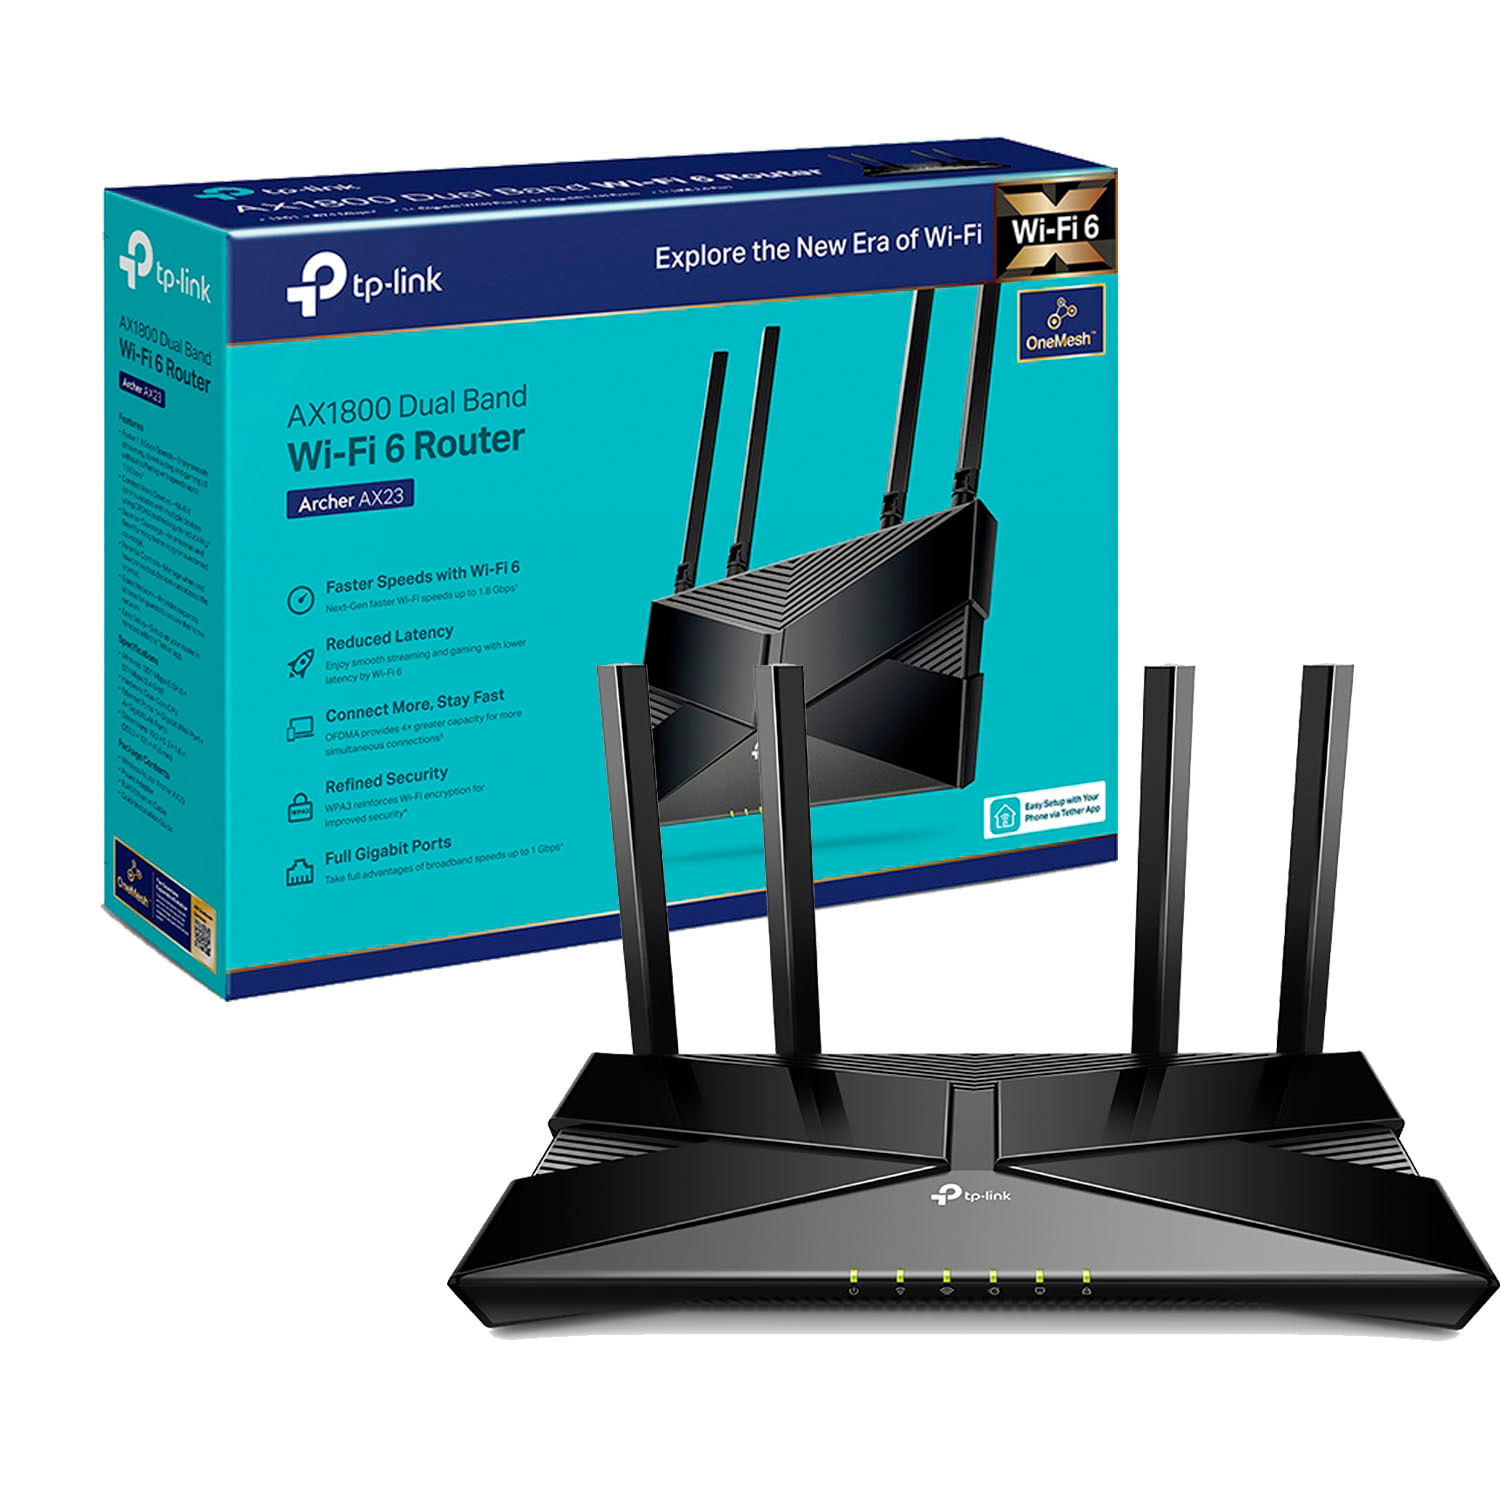 Router Inalámbrico Archer Ax23 Tp Link Ax1800 Wi Fi 6 Dual Band